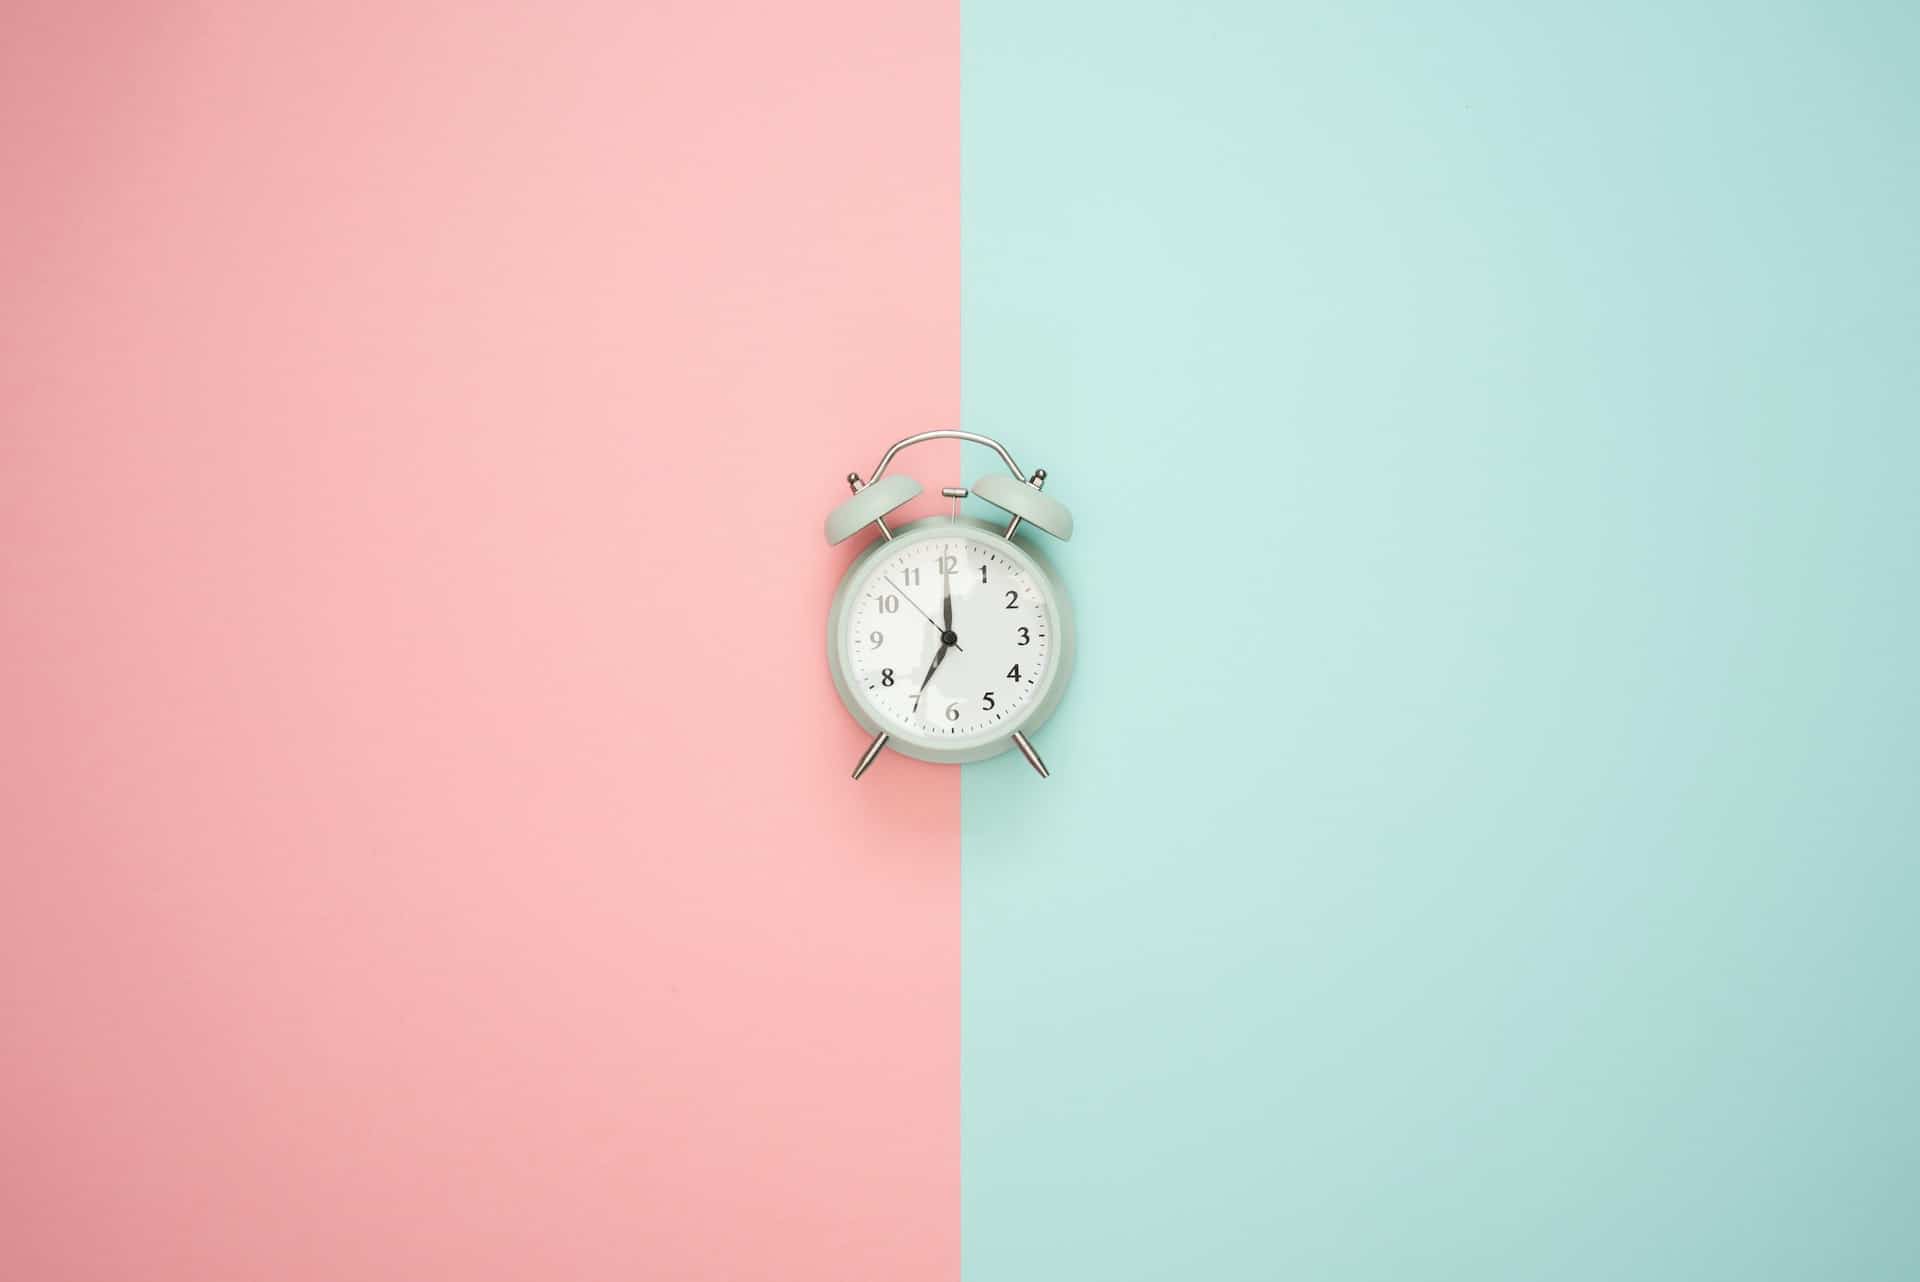 An alarm clock on a pink and blue background.